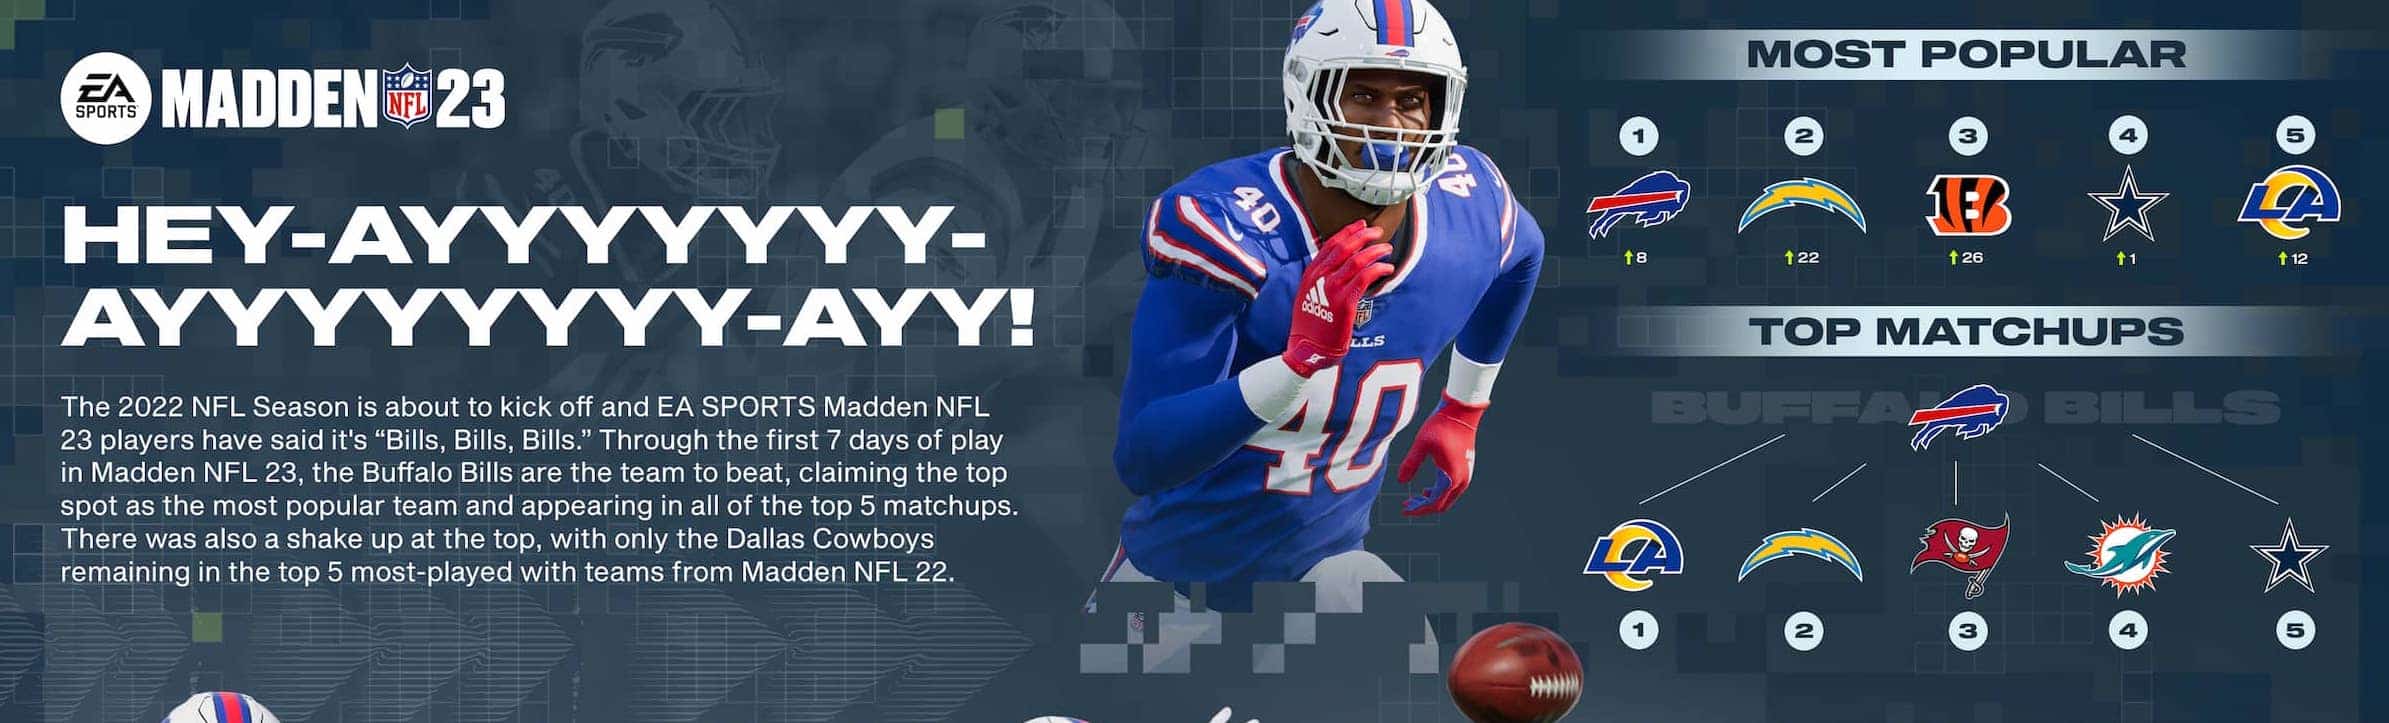 Fans can celebrate the start of the nfl season tomorrow with ea sports madden nfl 23 free trial on playstation and xbox